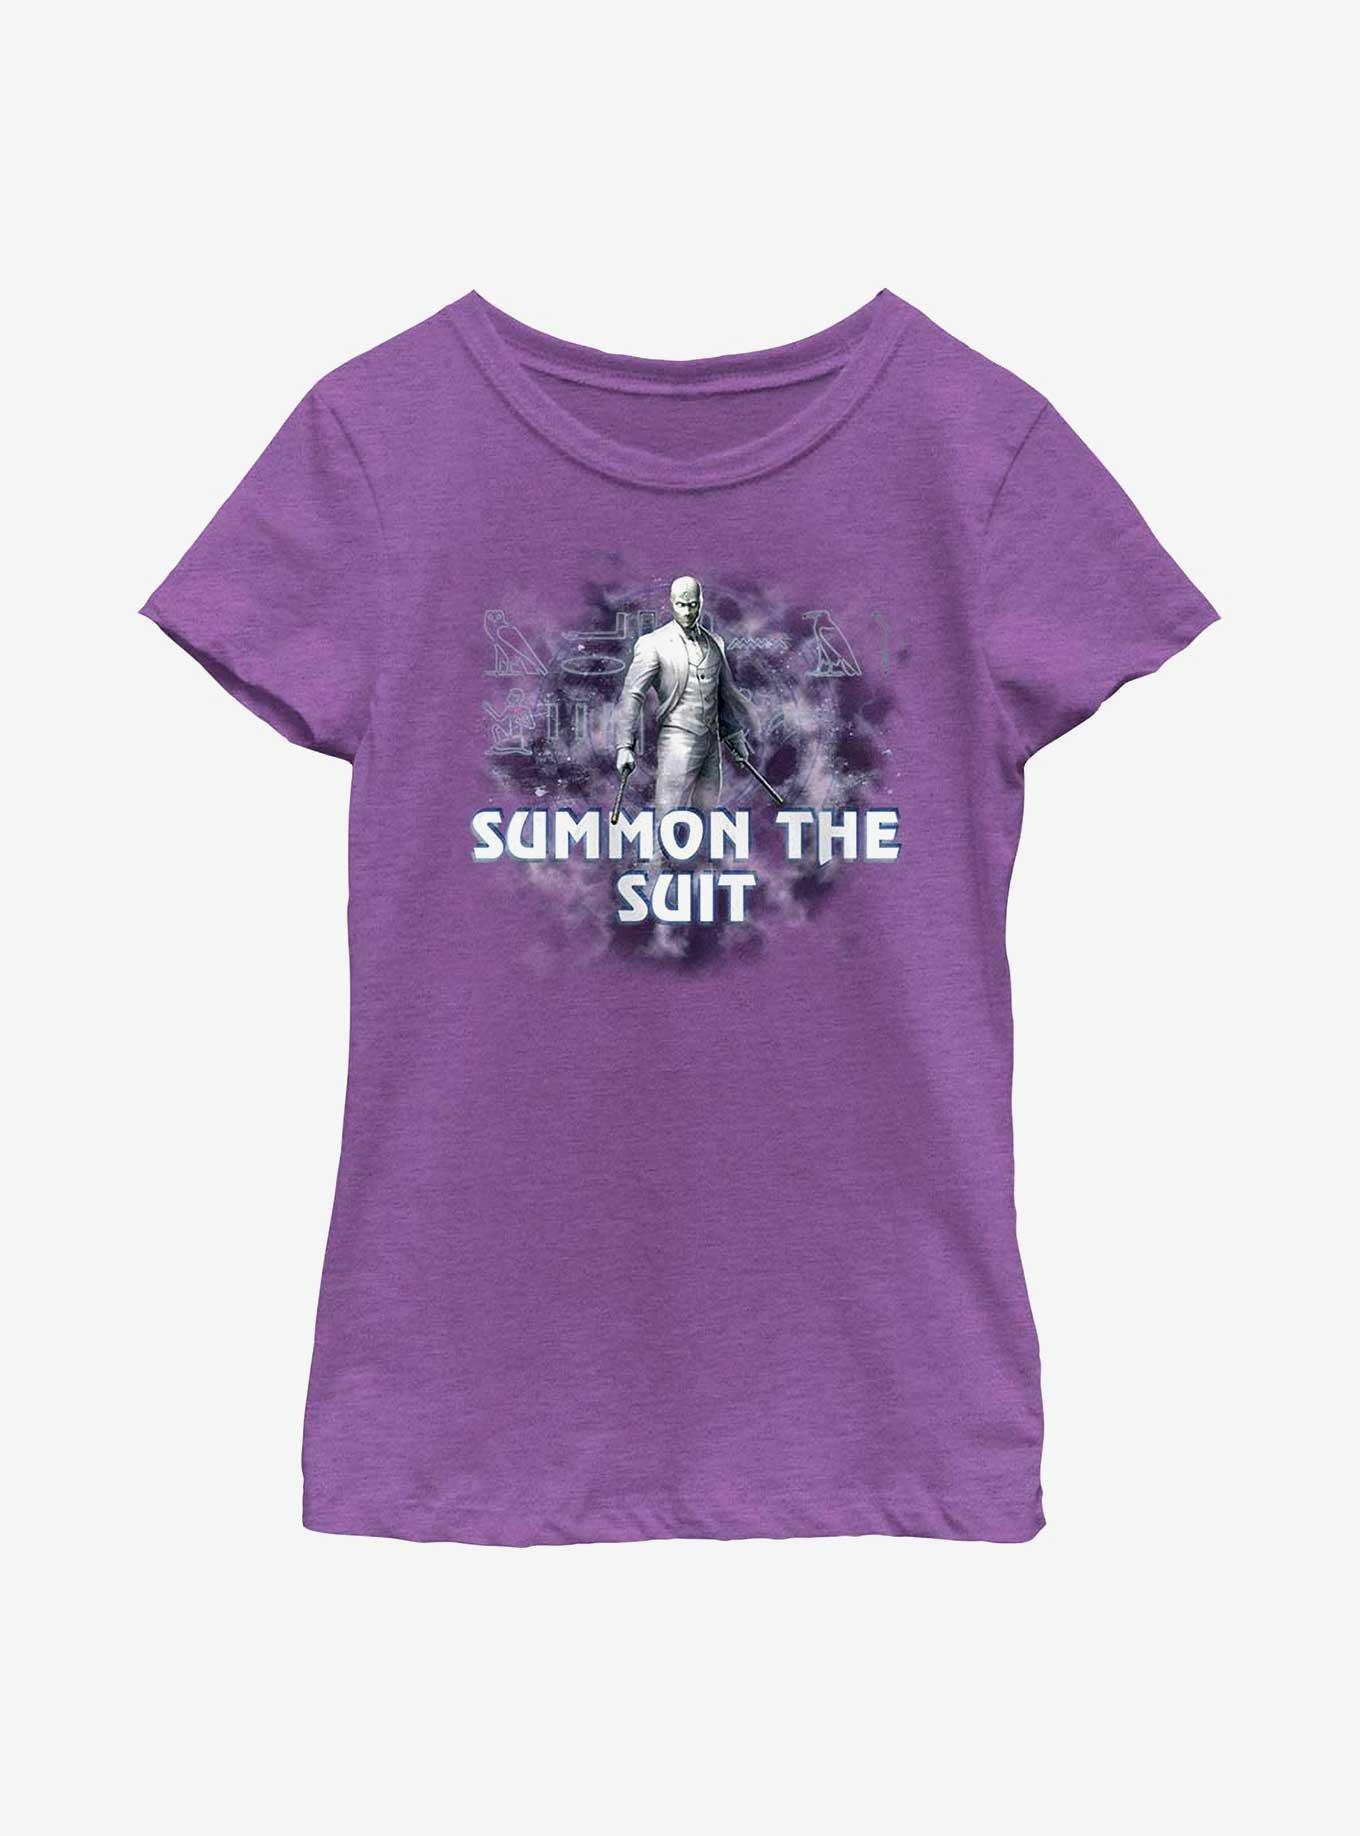 Marvel Moon Knight Summon The Suit Youth Girls T-Shirt, PURPLE BERRY, hi-res